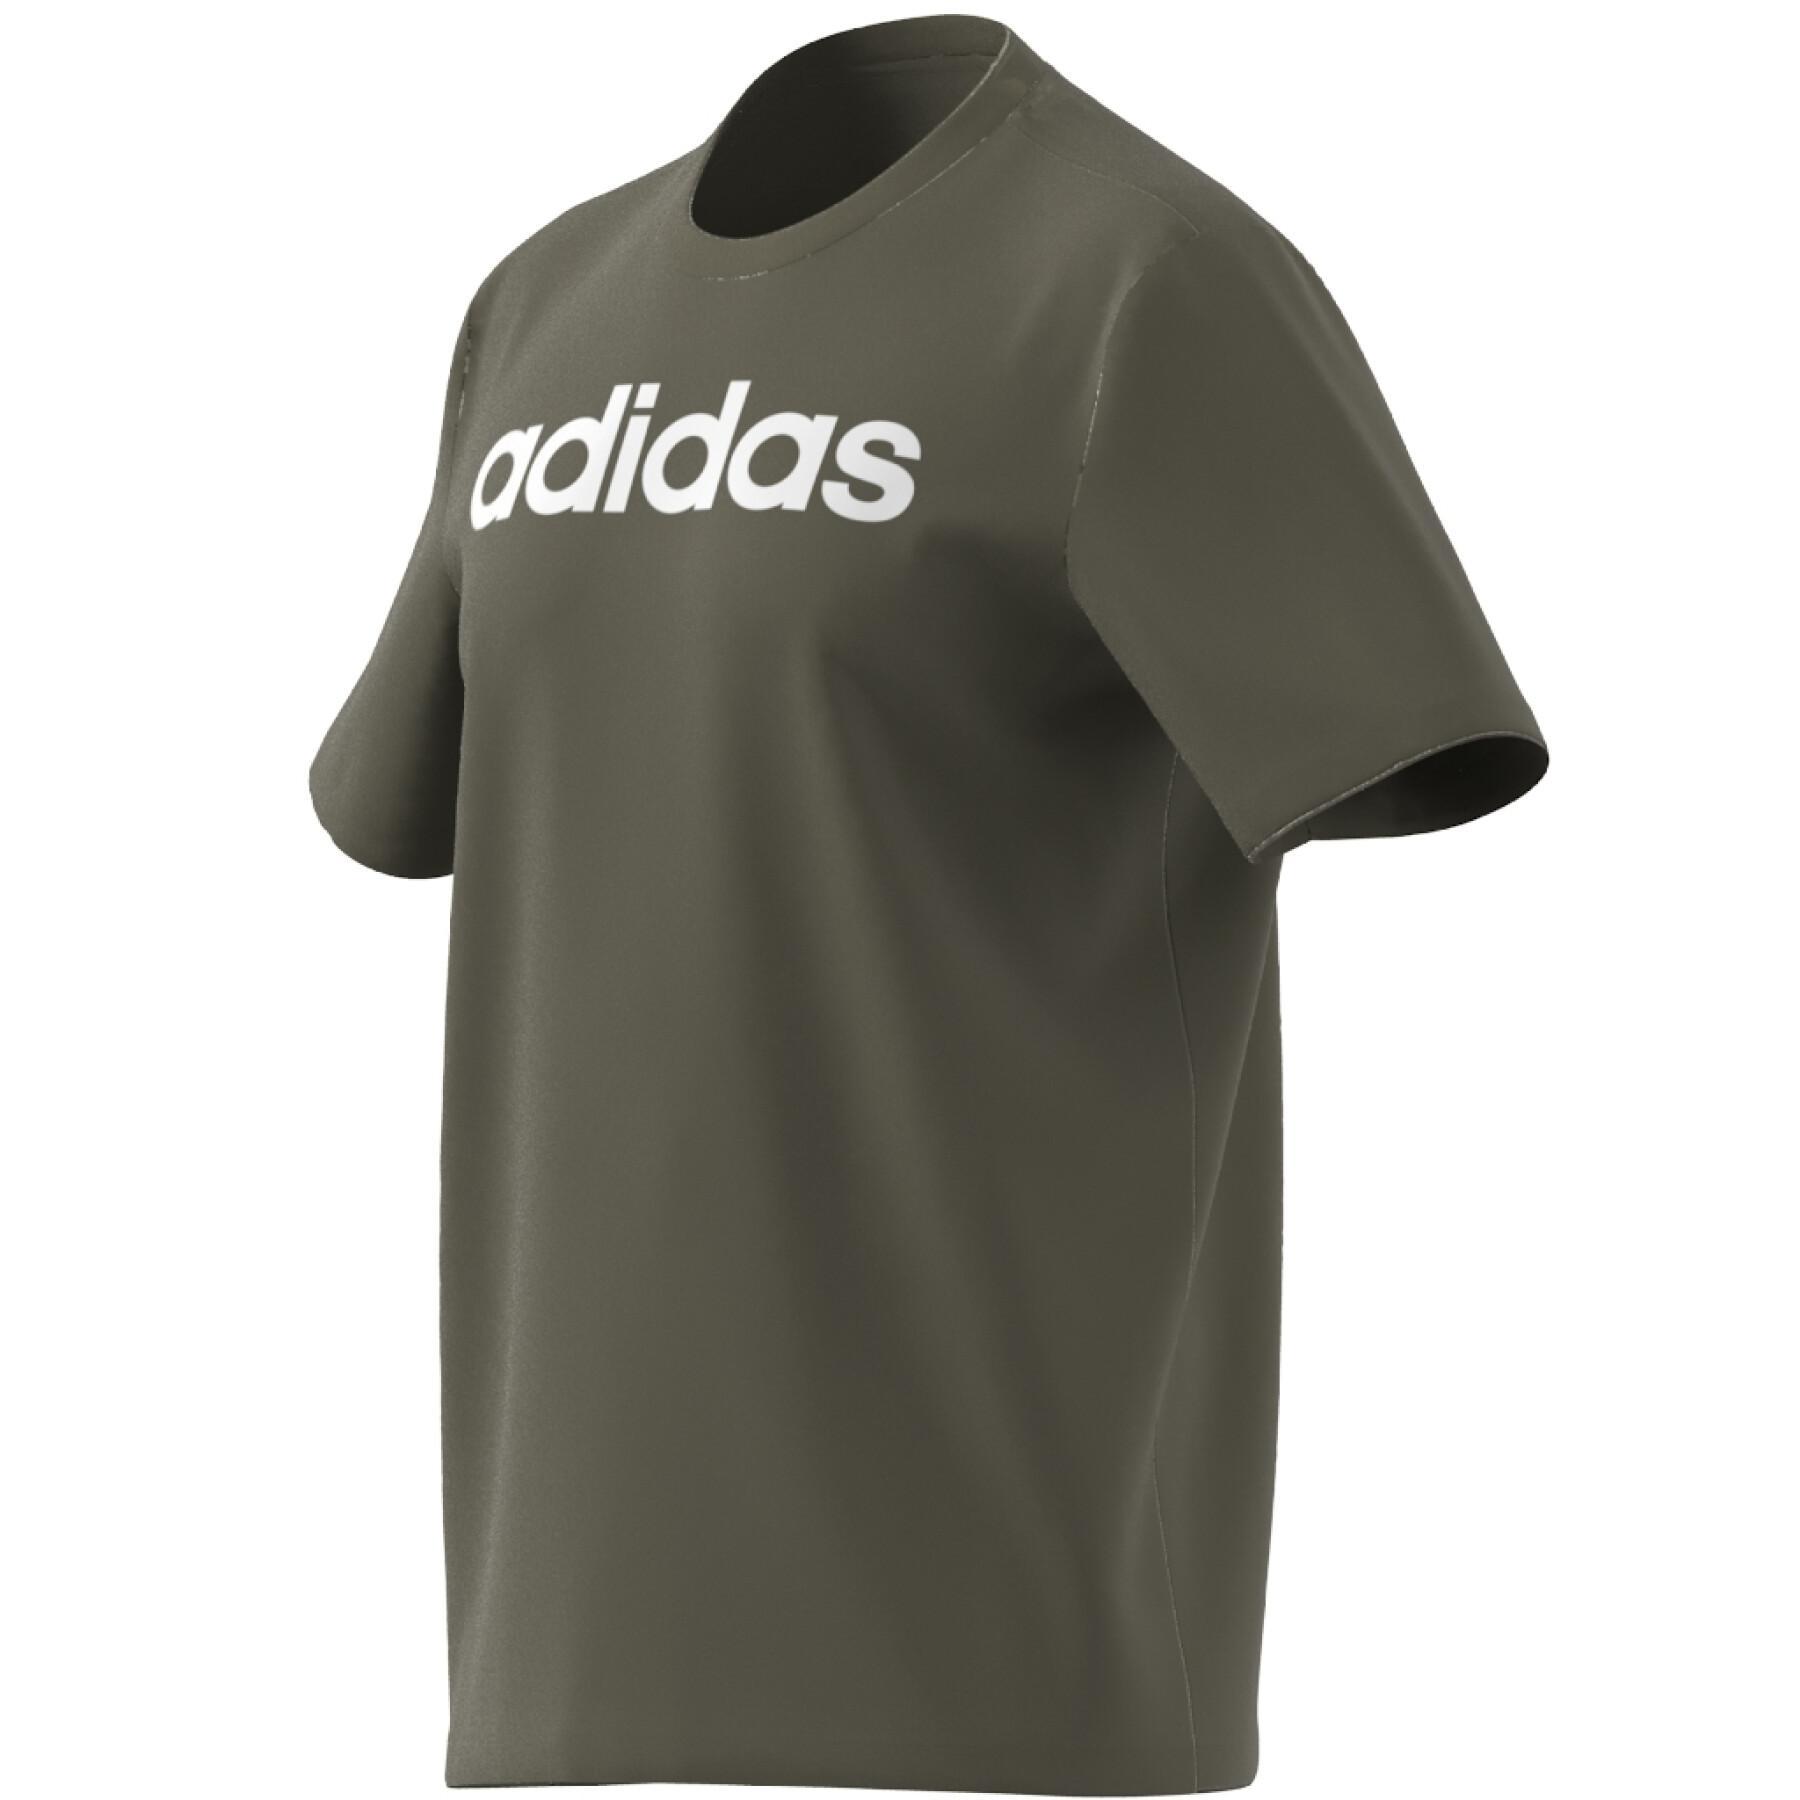 Jersey-T-Shirt adidas Essentials Linear Embroidered Logo